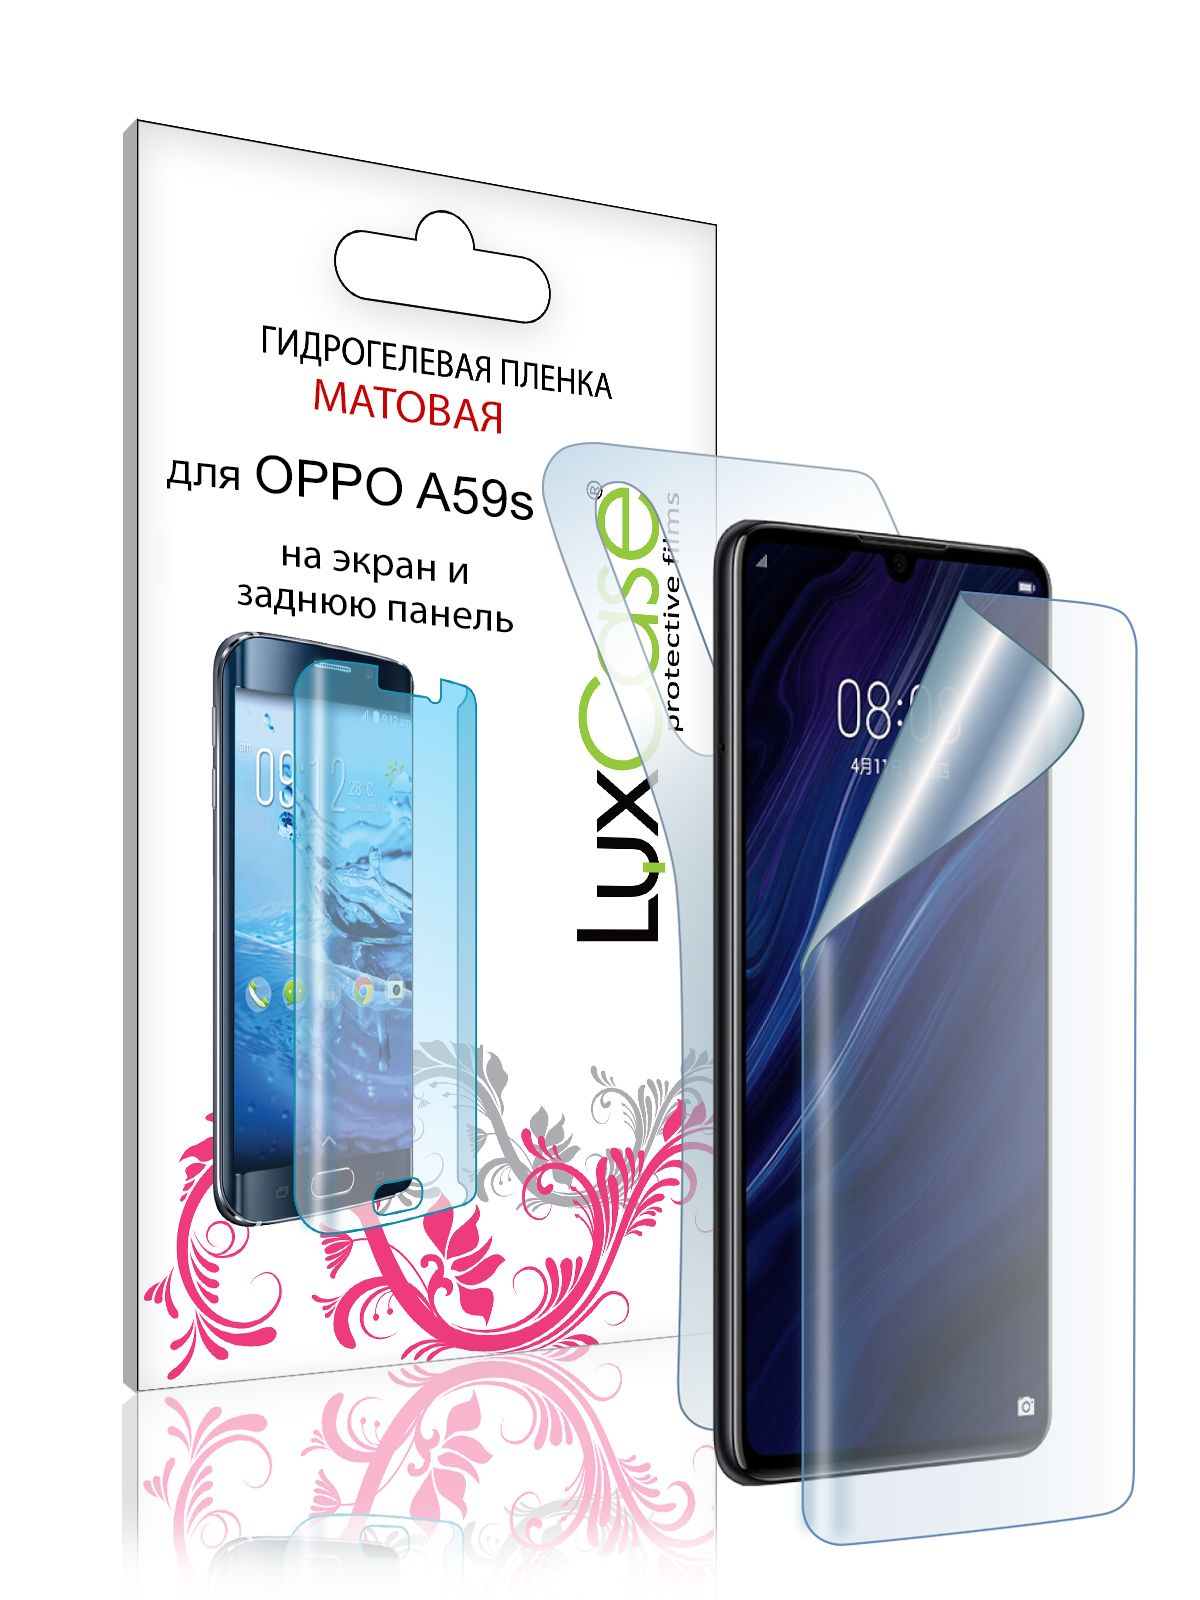 Гидрогелевая пленка LuxCase для Oppo A59s 0.14mm Matte Front and Back 87647 гидрогелевая пленка luxcase для oppo a59s 0 14mm matte front and back 87647